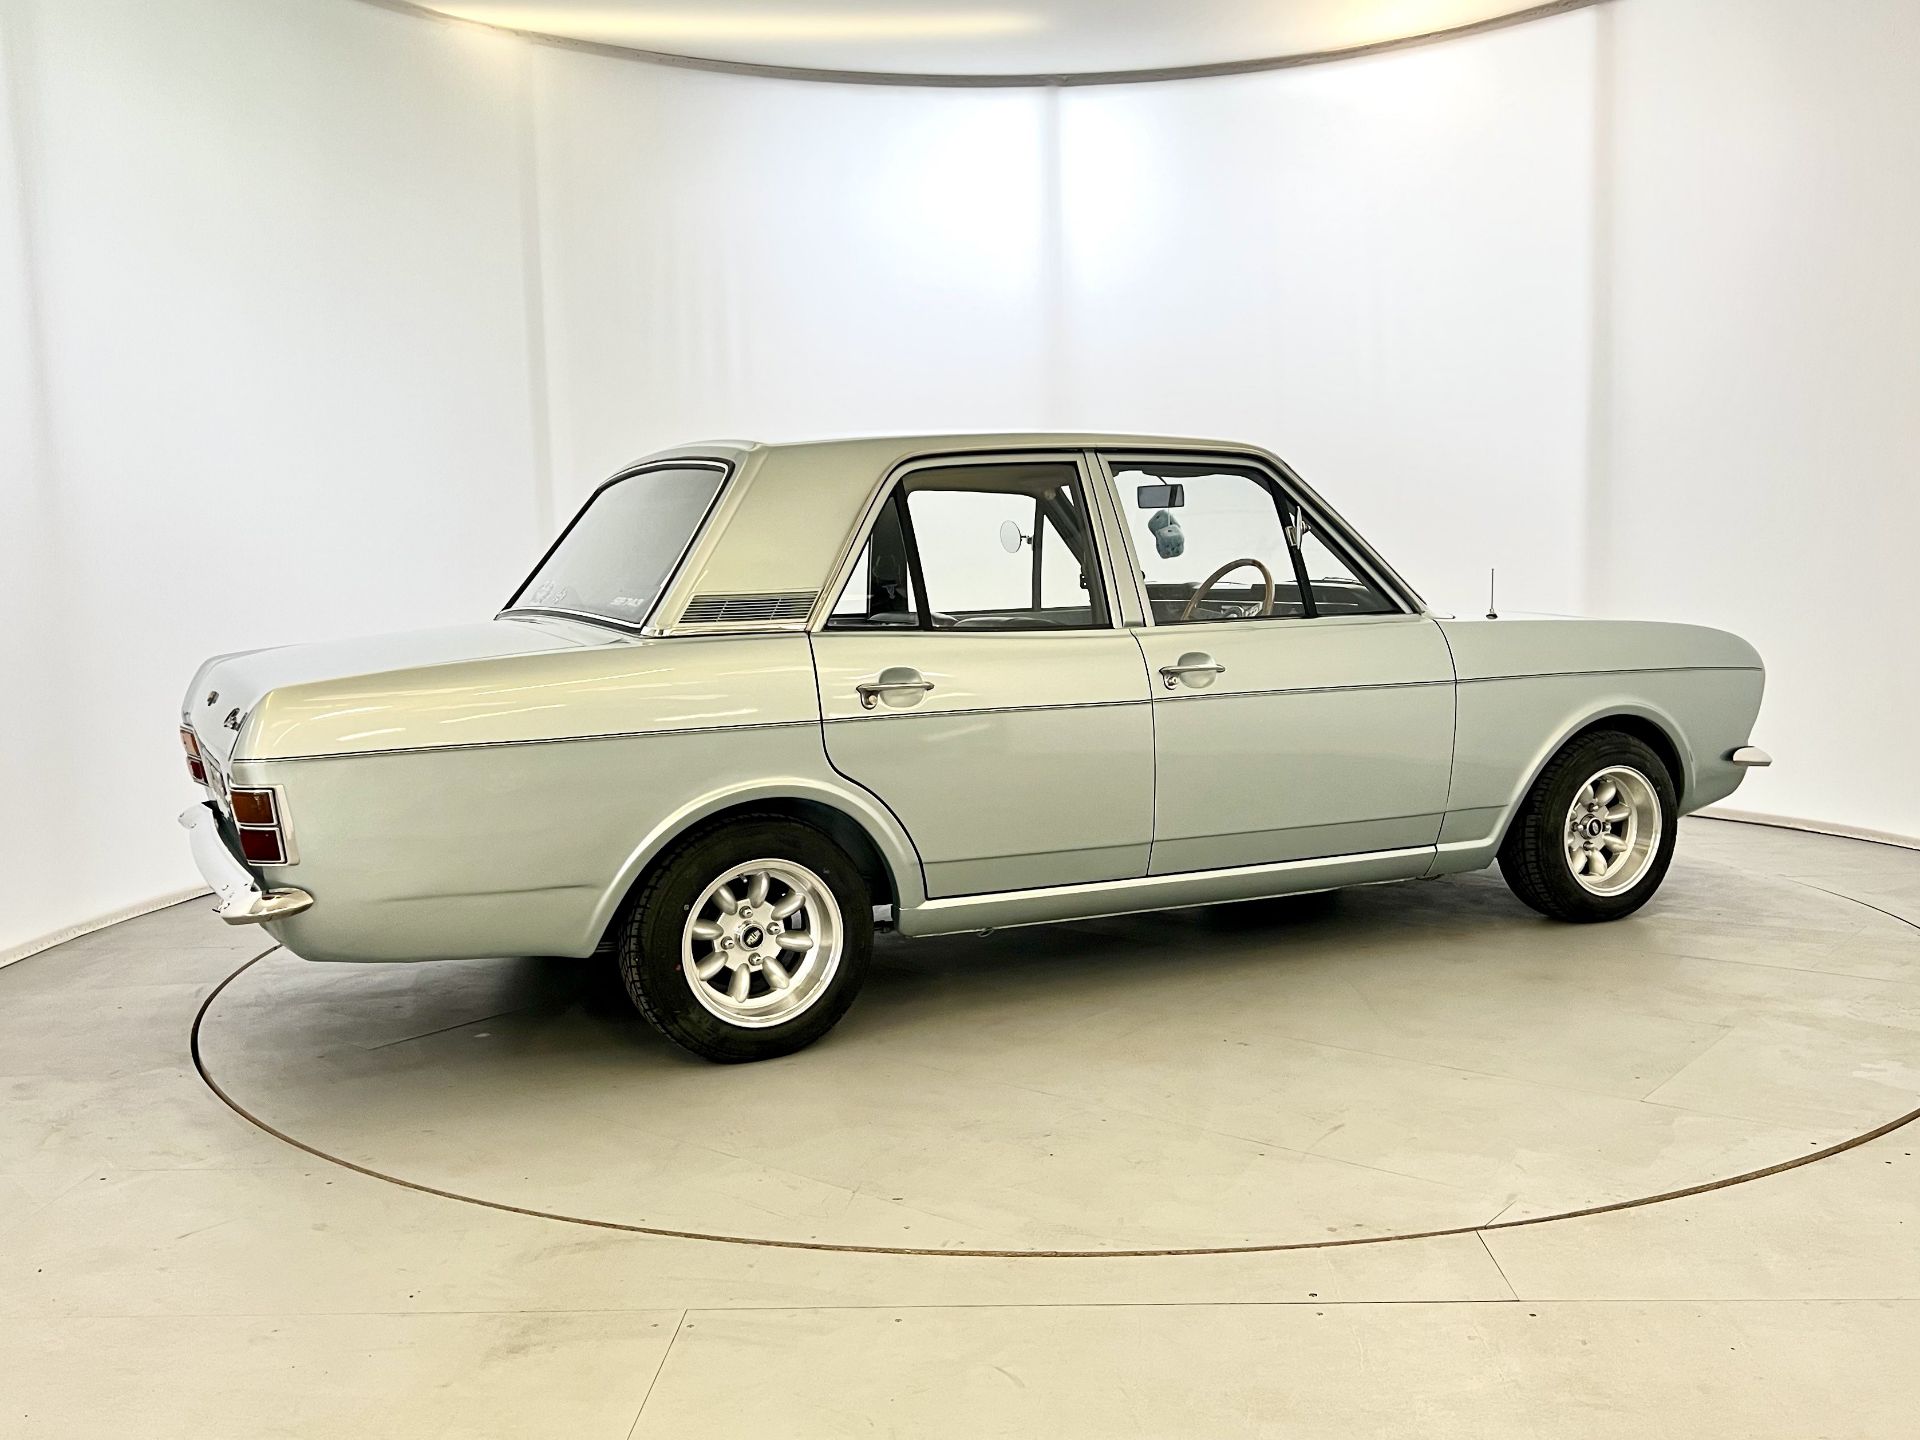 Ford Cortina 1300 DeLuxe - Image 10 of 36